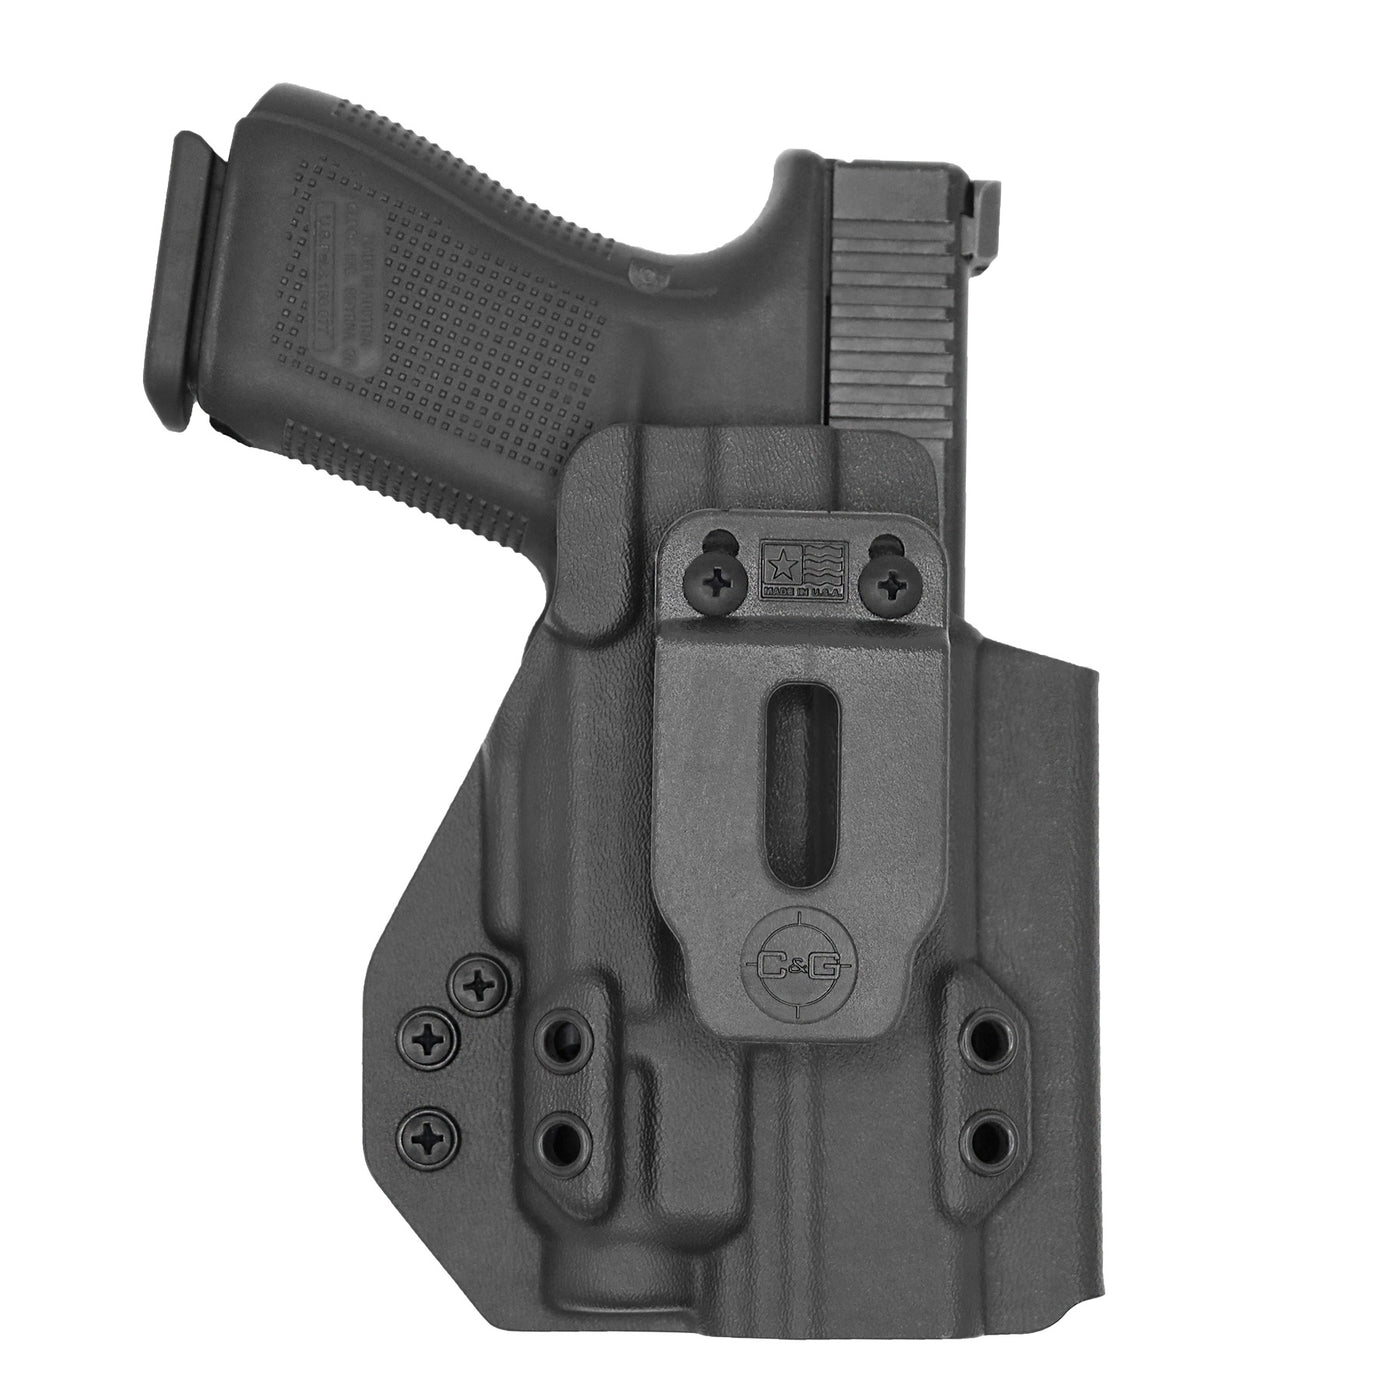 C&G Holsters custom IWB Tactical CZ P10/c streamlight tlr7/a in holstered position